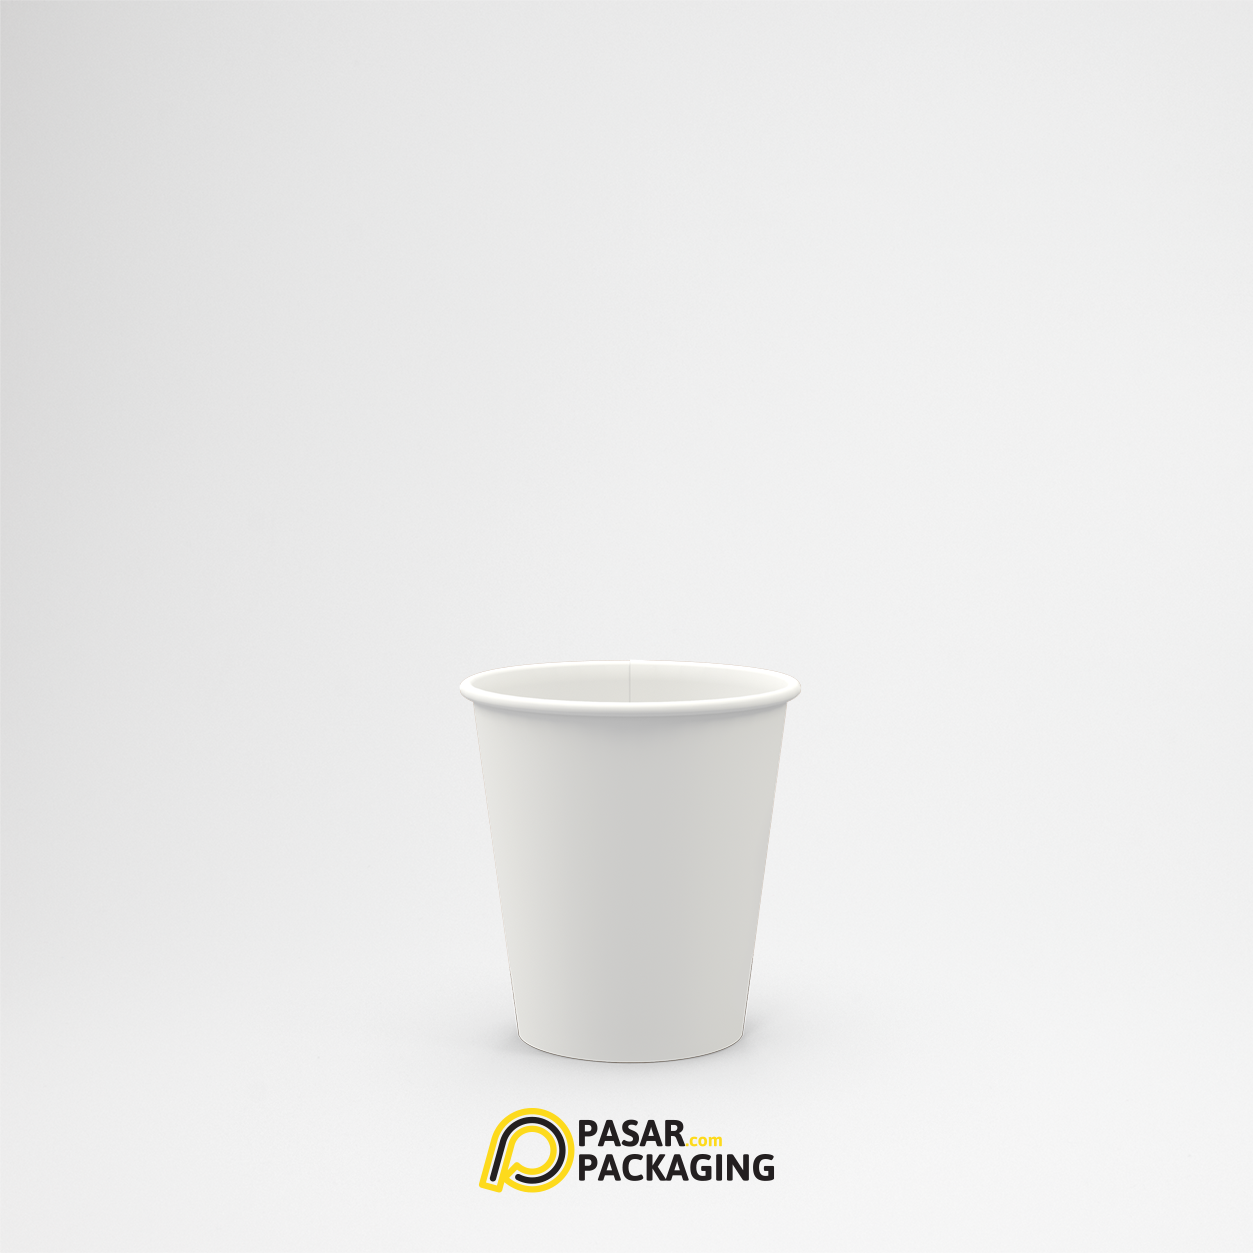 6.5oz Hot Paper Cup - Pasar Packaging